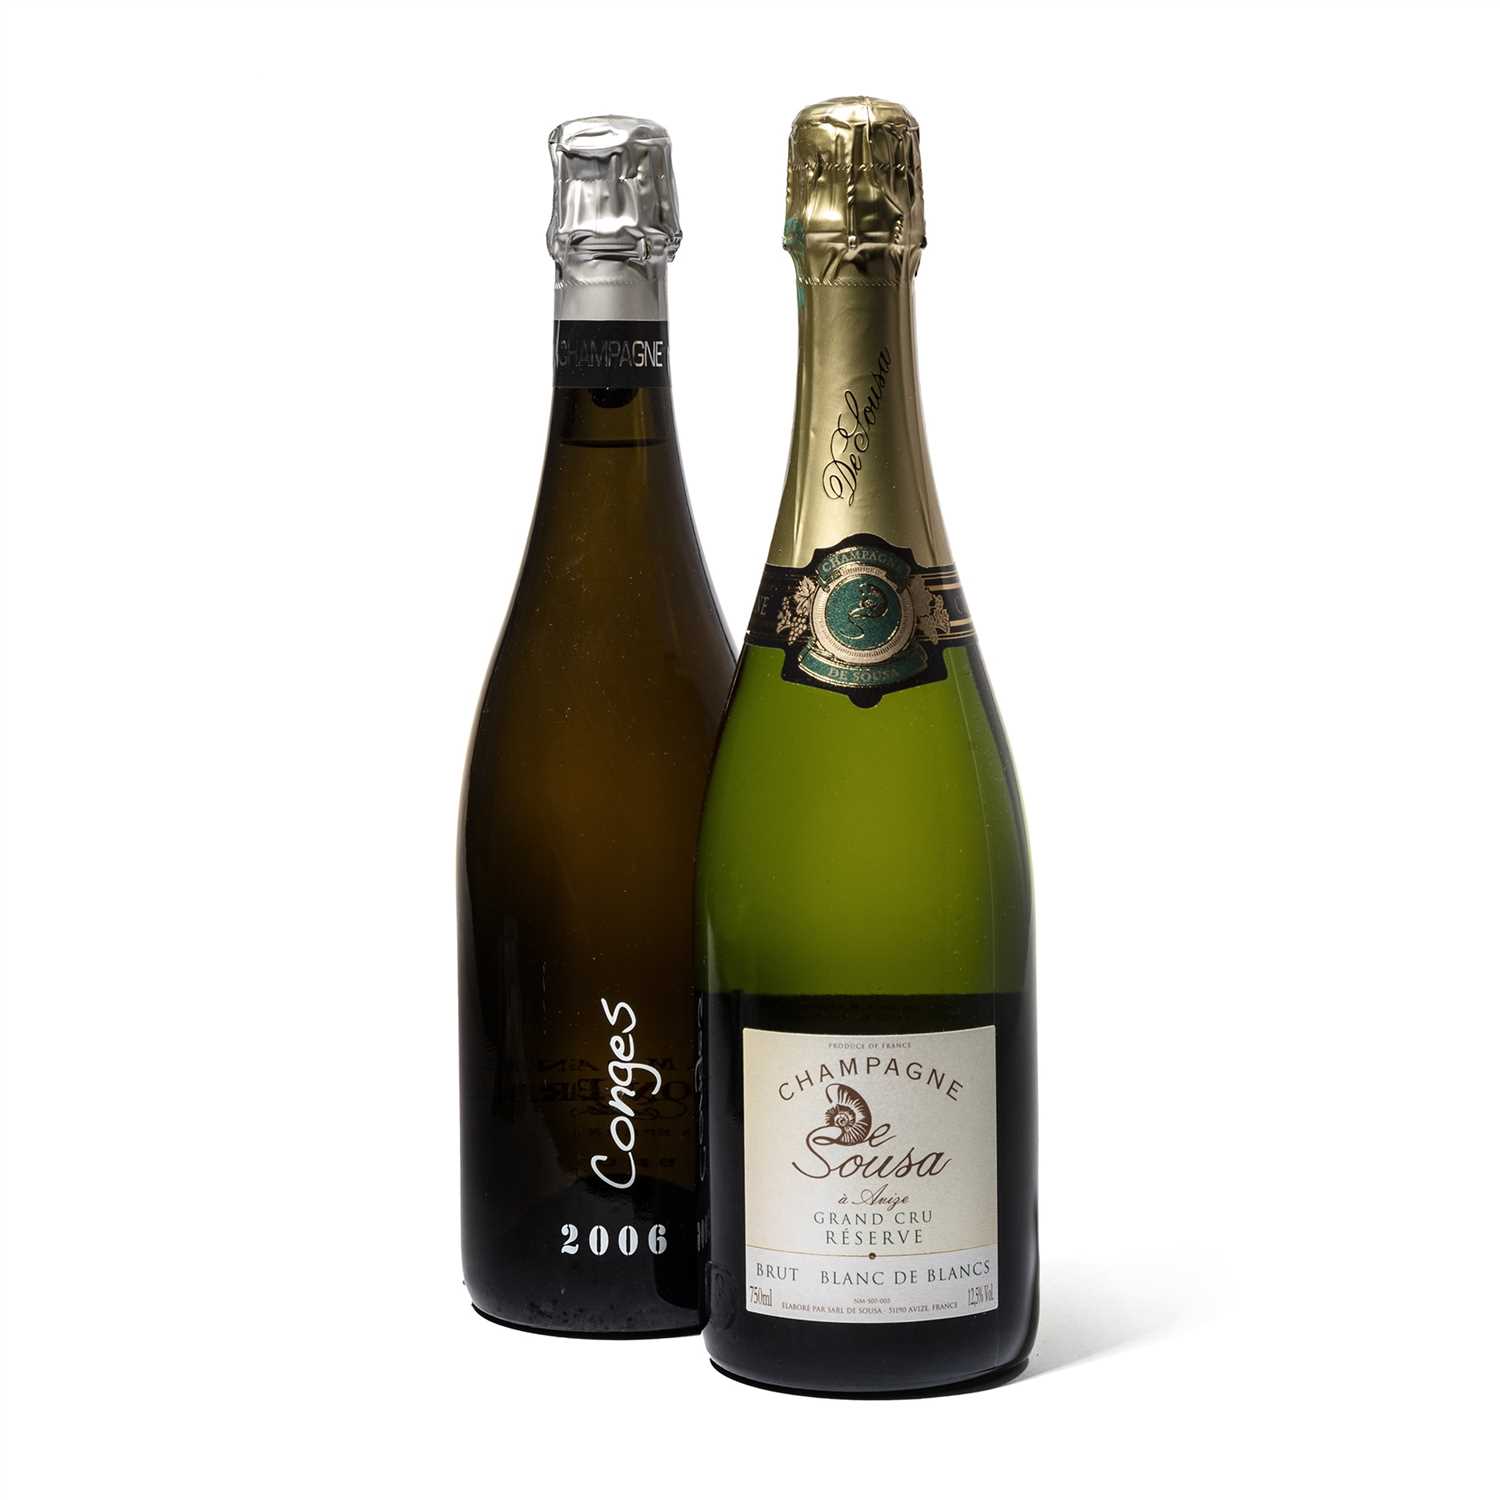 Lot 181 - Mixed Italian Sparkling and Champagne